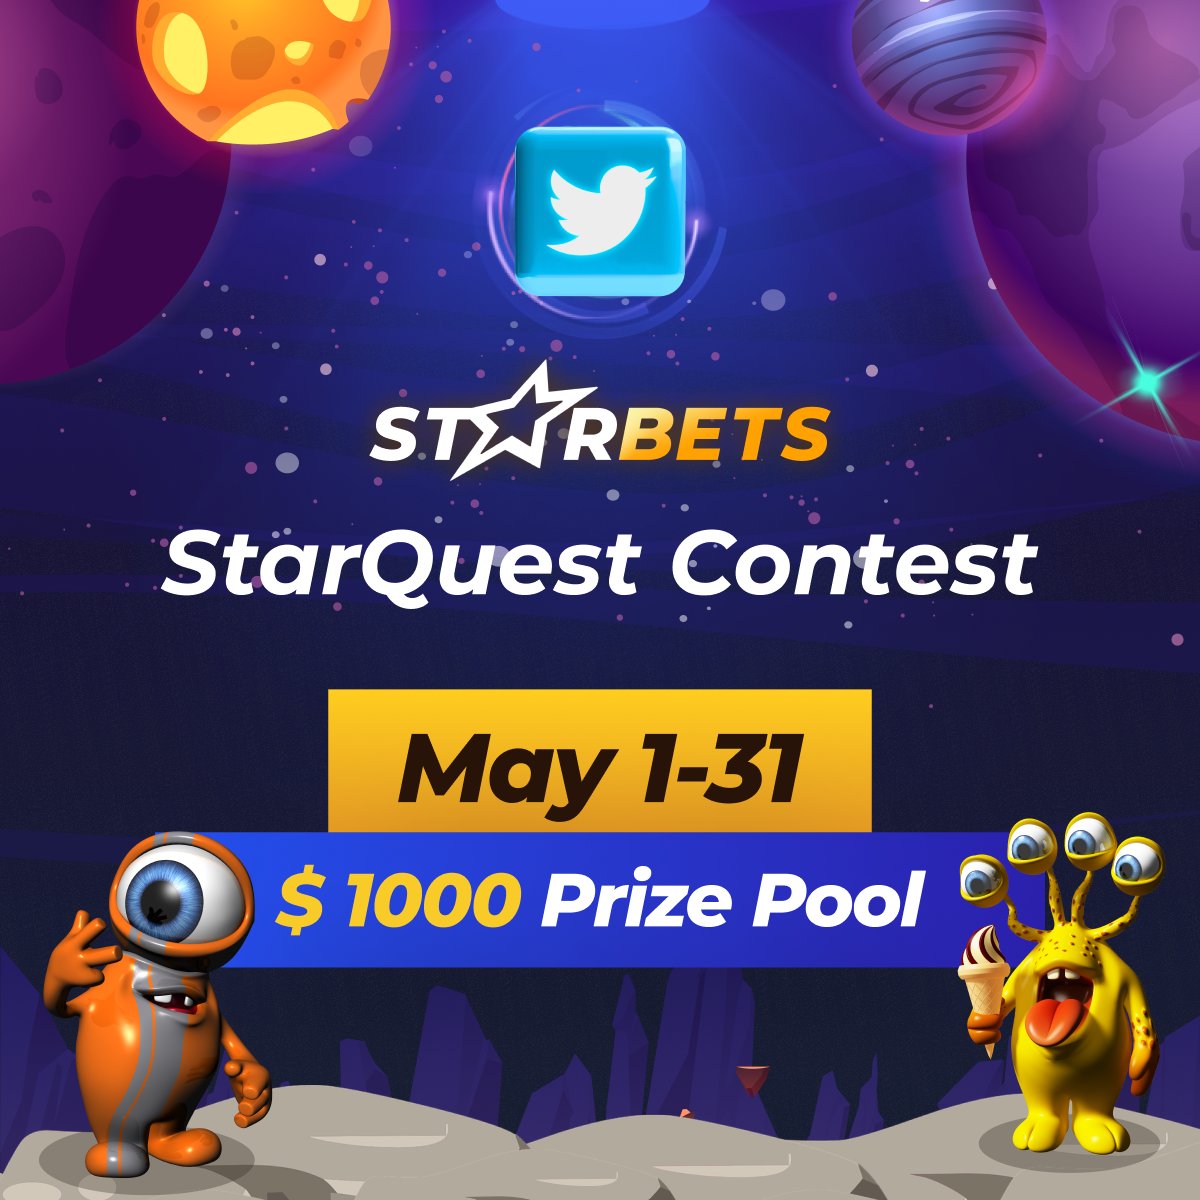 🤩Week 3 of The StarQuest Contest for $1000 Prize Pool is here! To enter: 1. Follow us here 2. RT this post 3. Tag 2 friends 10 winners will be announced every Monday. Winners must message us on twitter with their StarBets username to claim the prize. #StarBets #CryptoGames